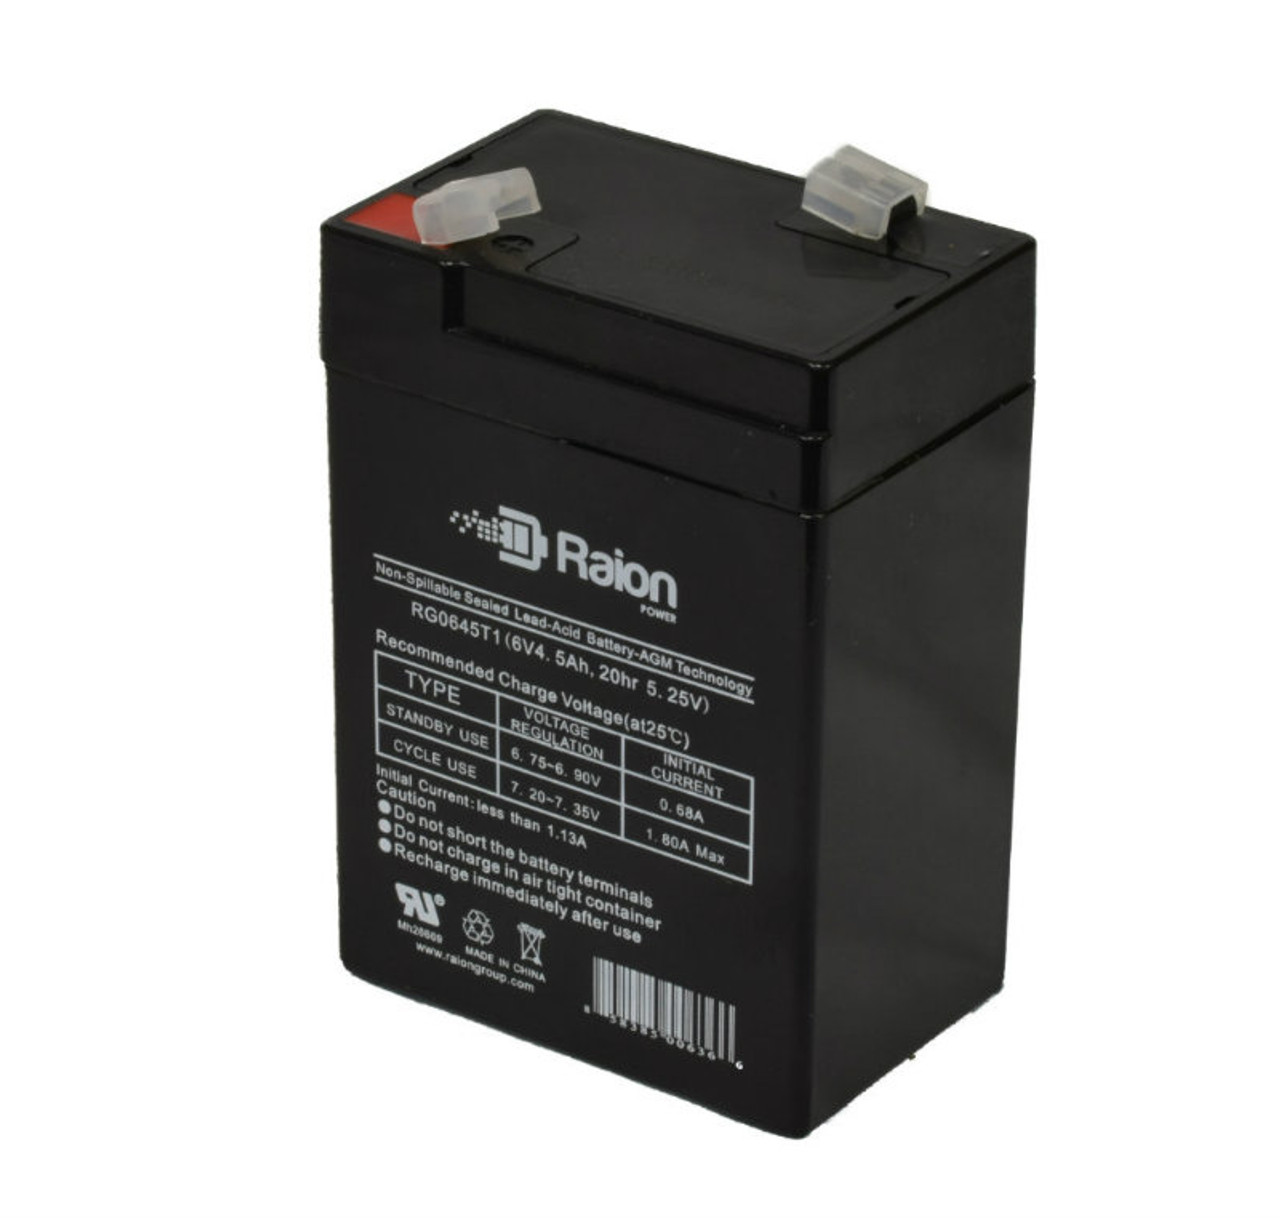 Raion Power RG0645T1 6V 4.5Ah Replacement Battery Cartridge for FirstPower FP645A